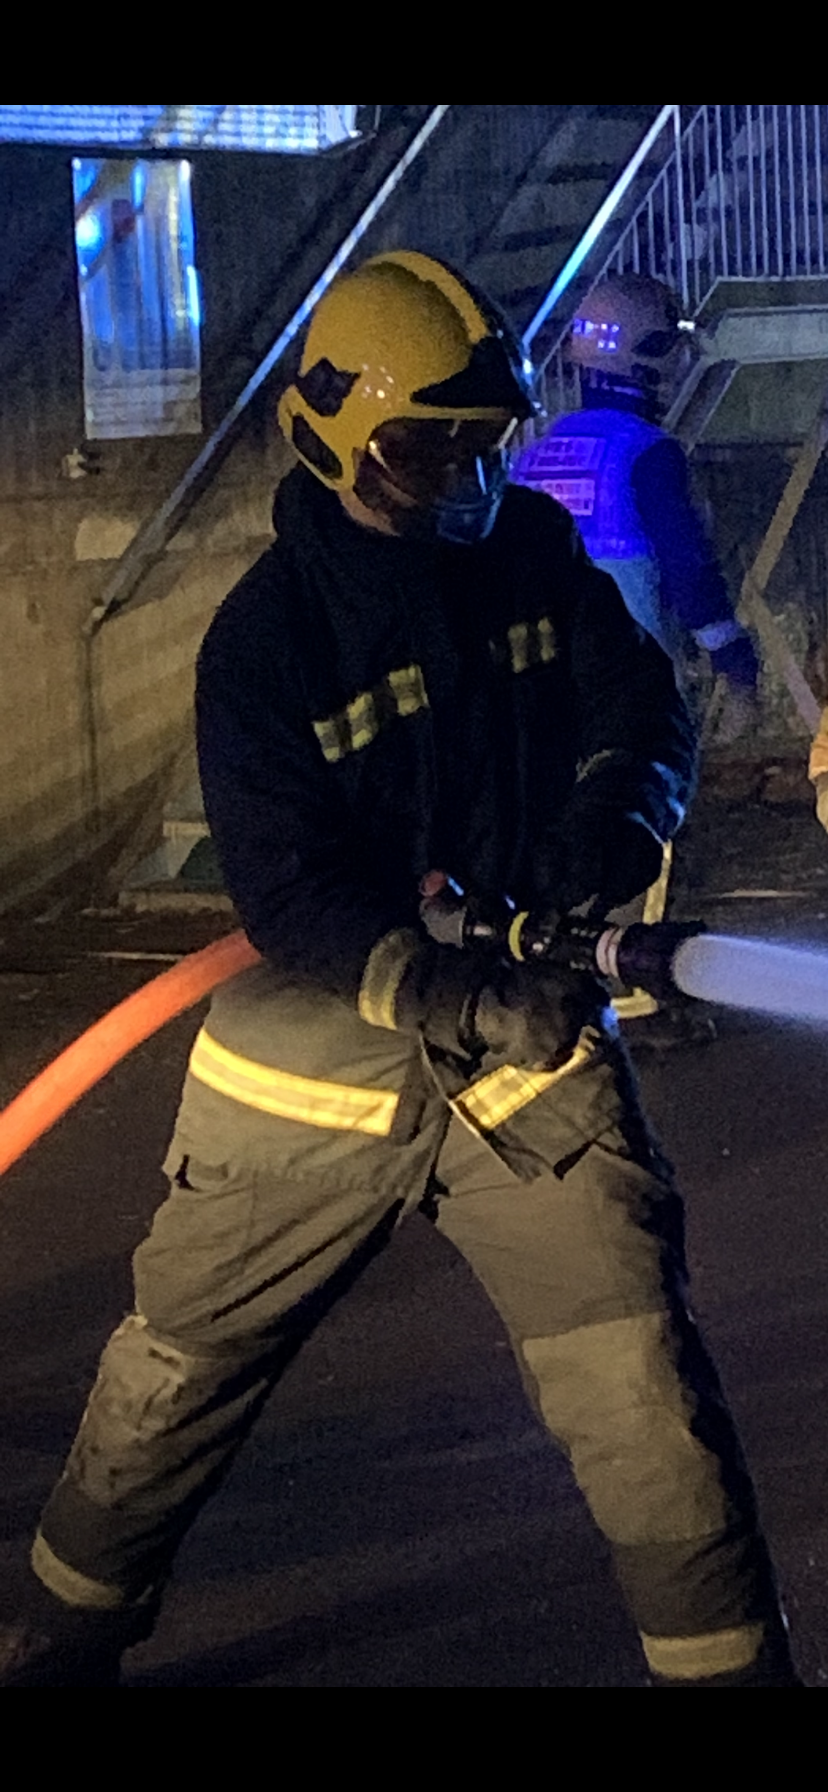 RAF Firefighter in training with water hose